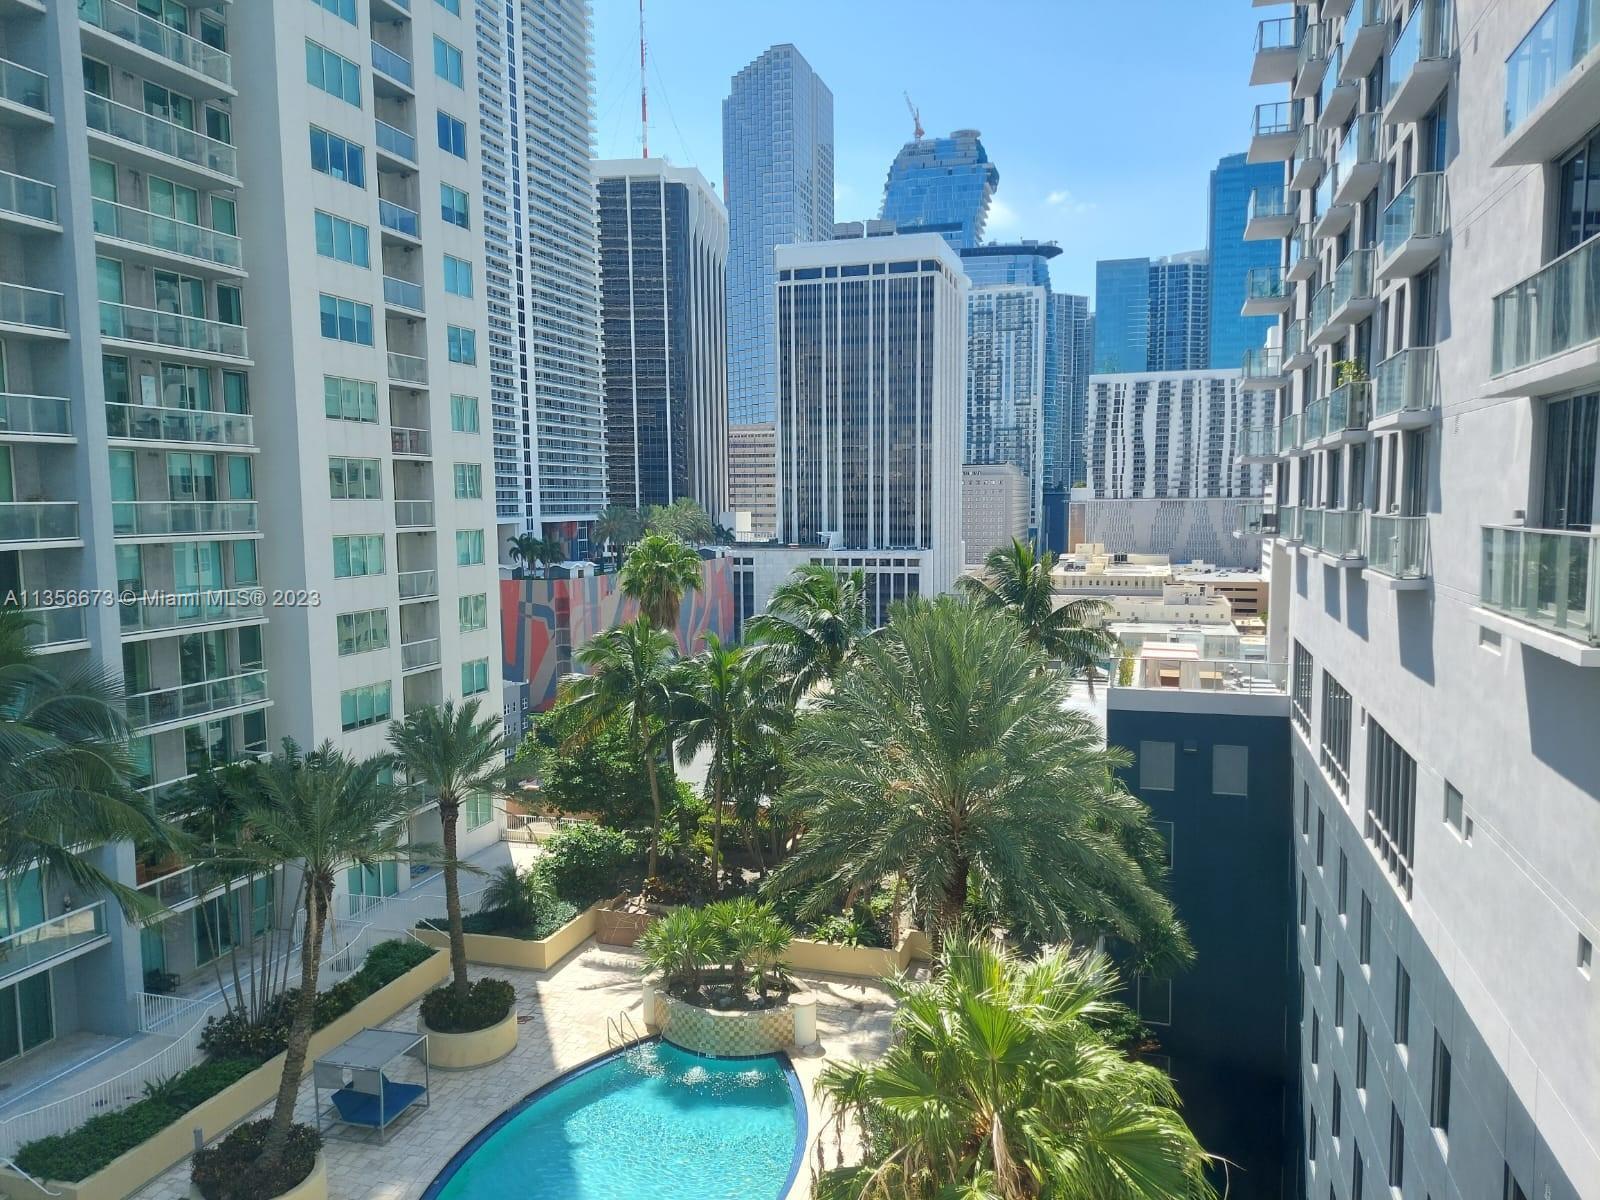 Sold AS-IS, Amazing Opportunity to own in the heart of  Downtown Miami is within Walkable distance t